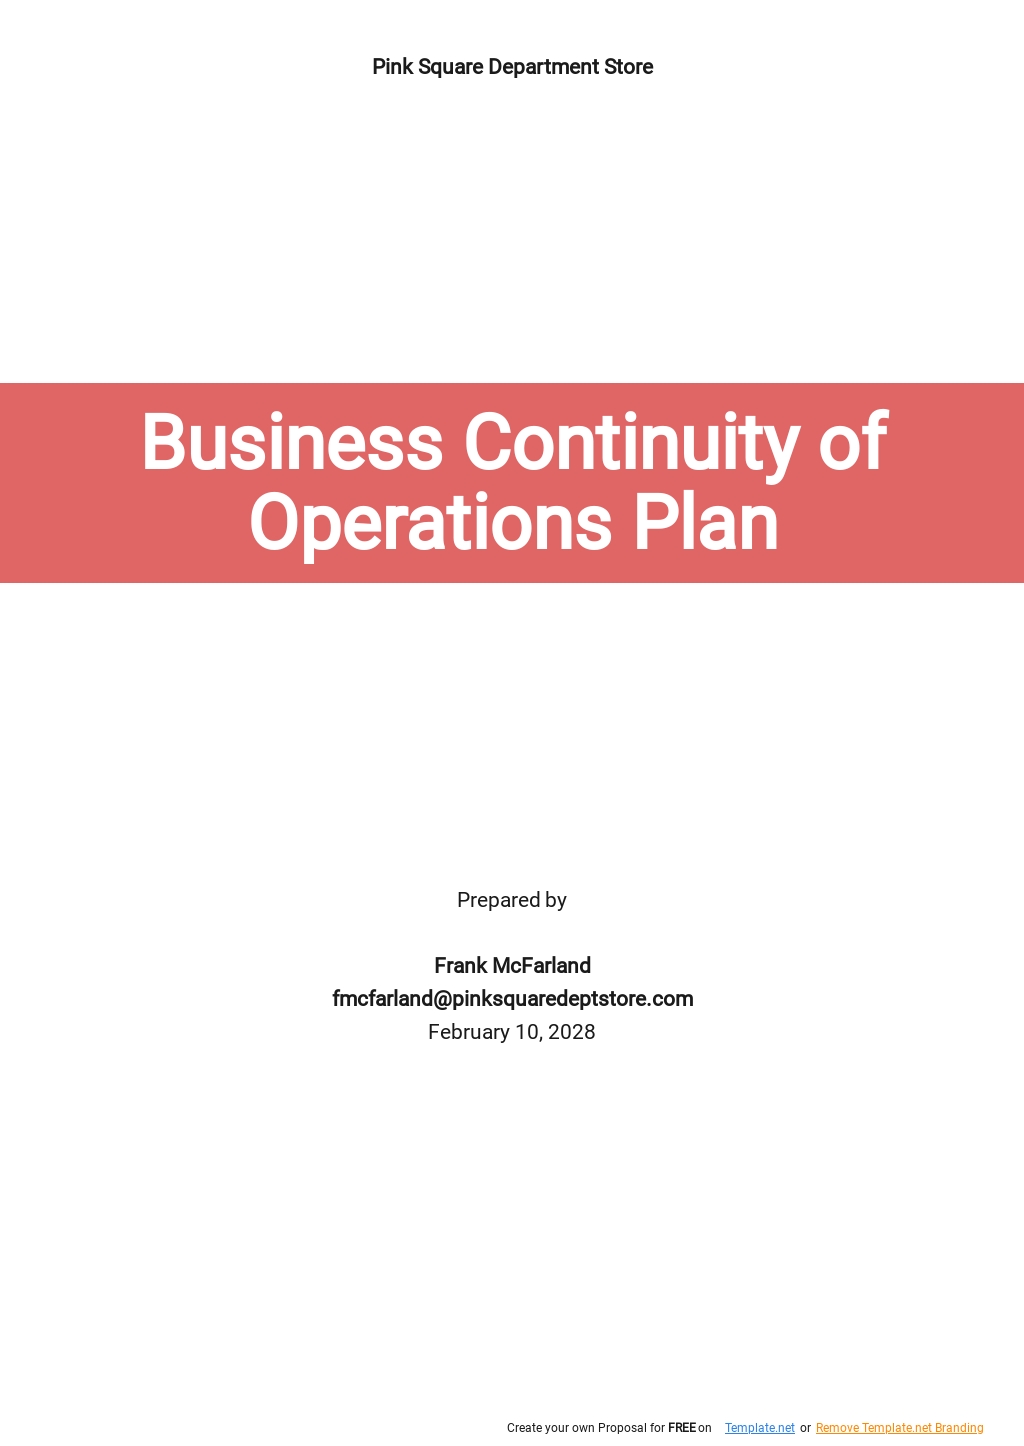 Business Continuity of Operations Plan Template